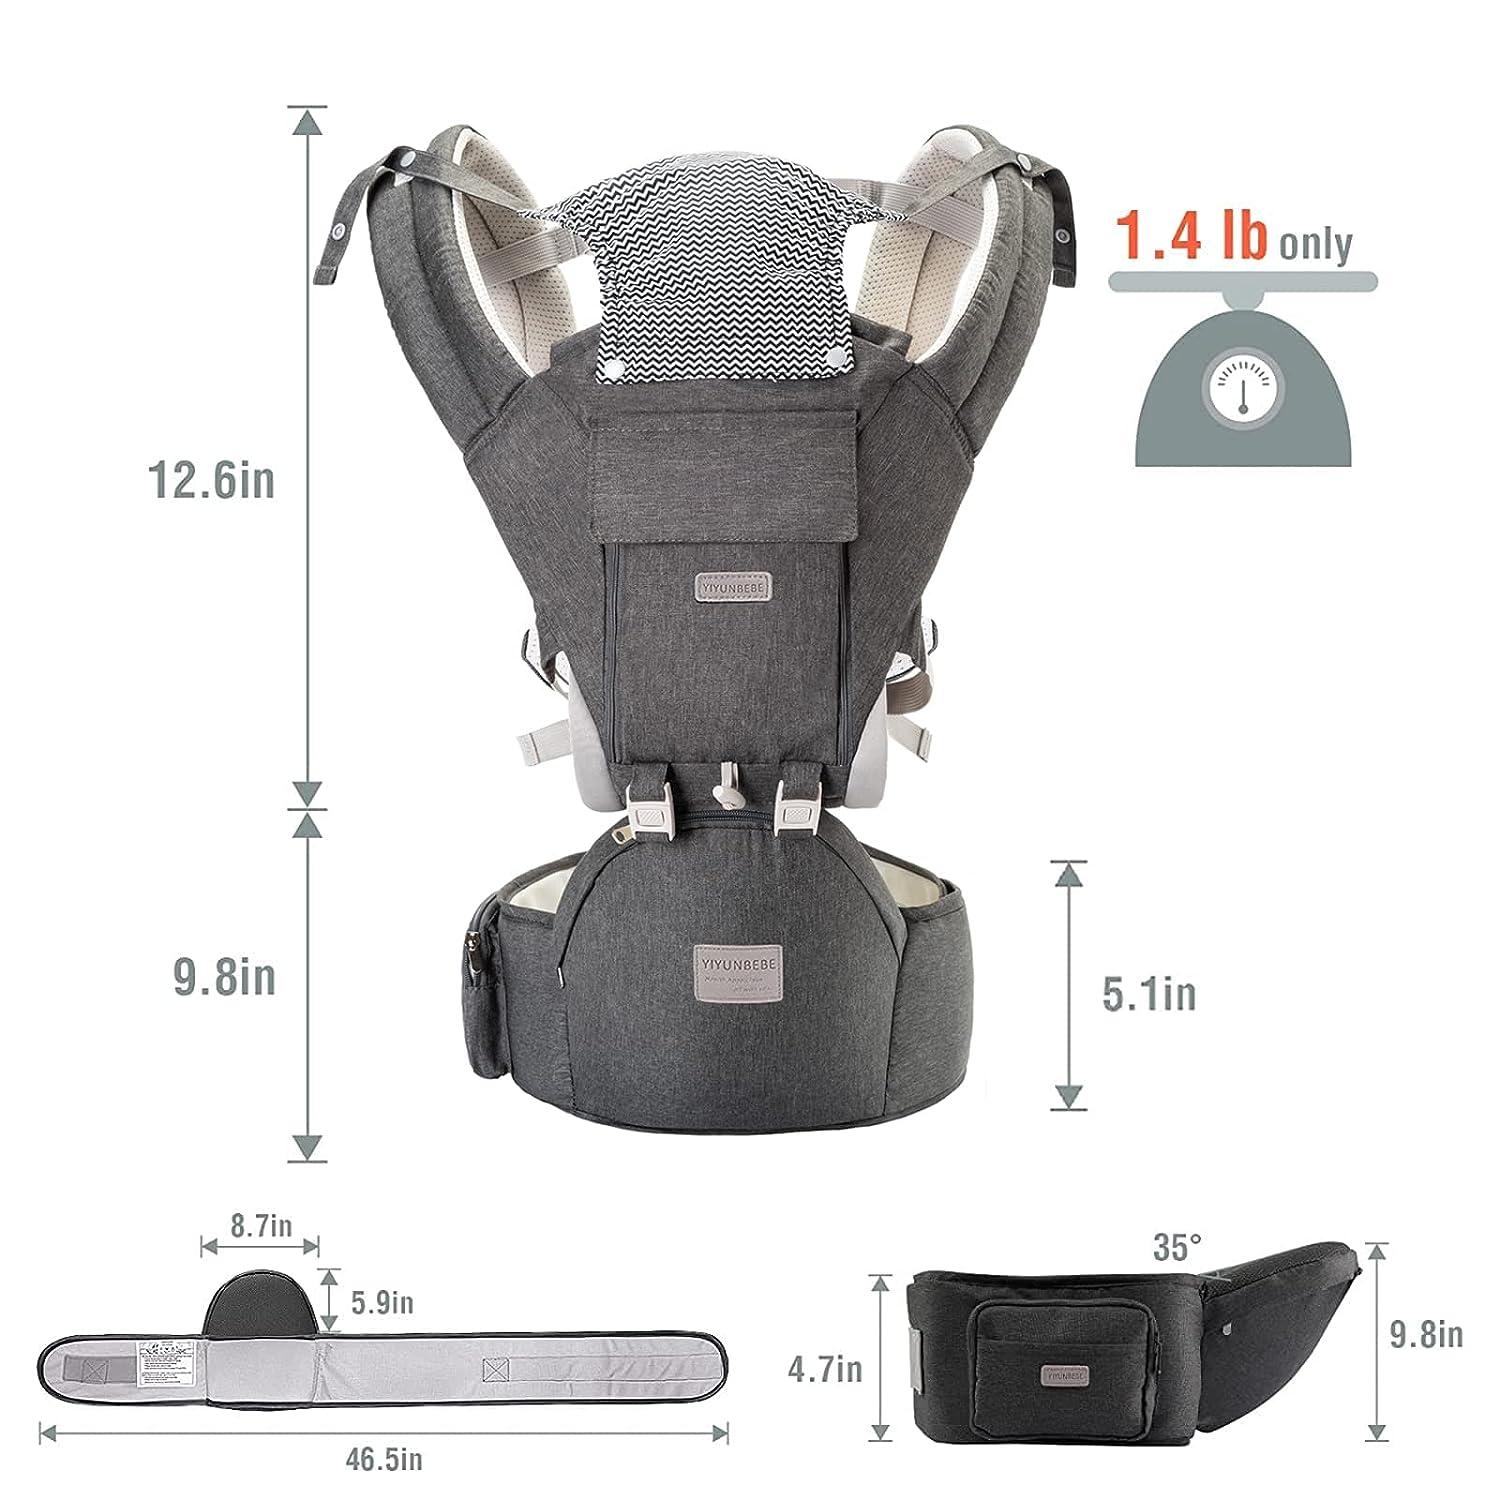 Ergobaby Omni 360 Baby Carrier With Lumbar Support - Black